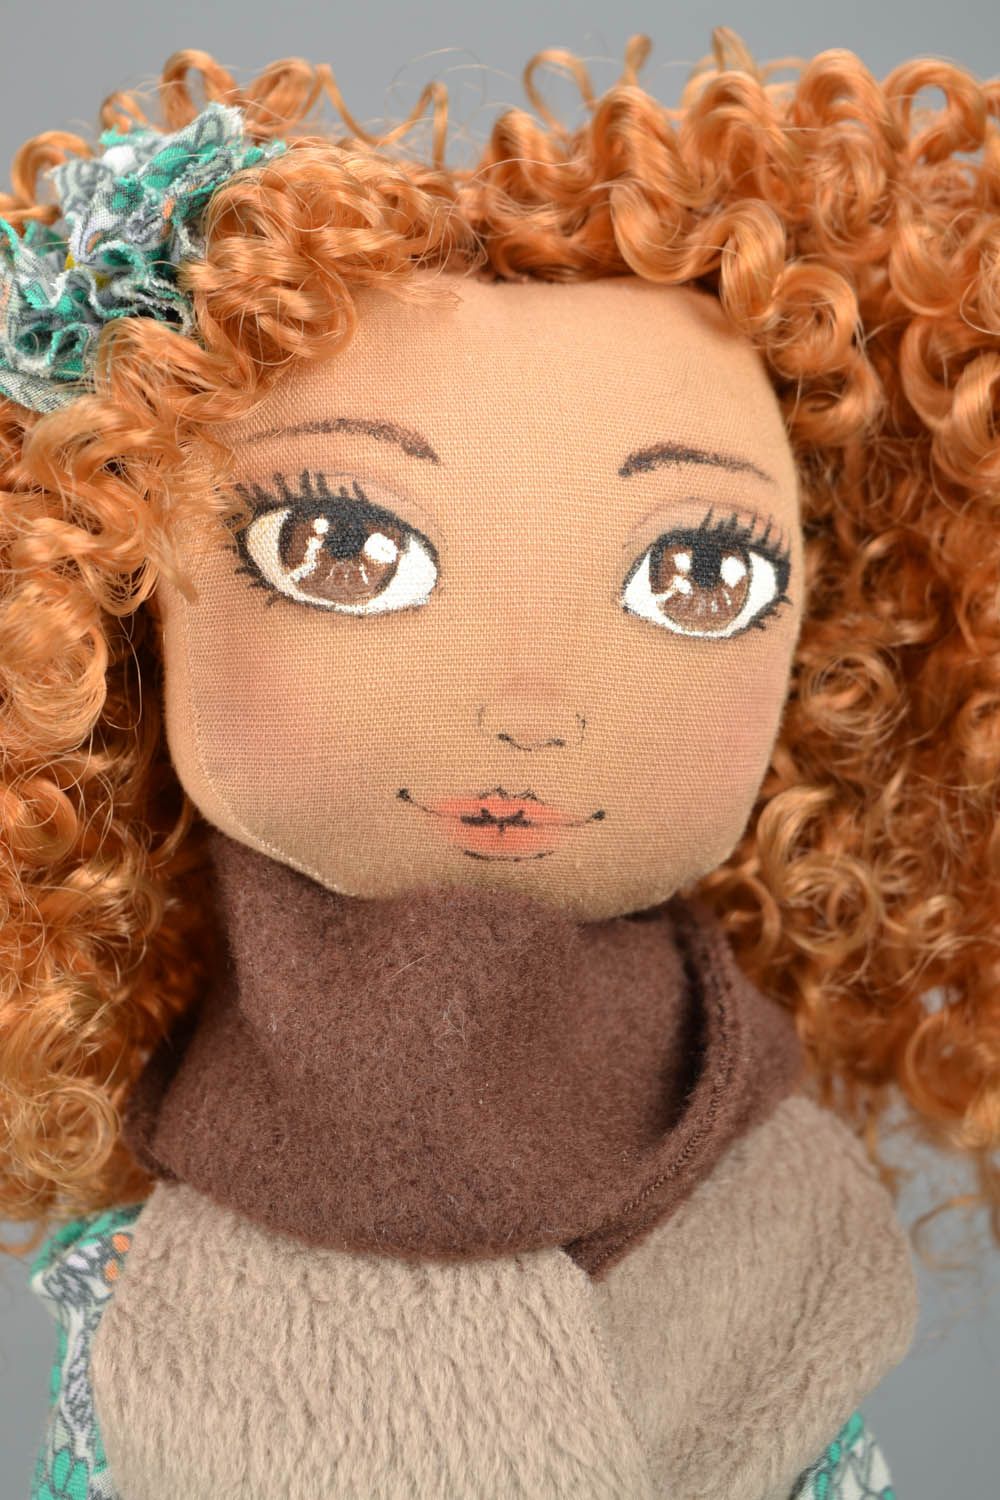 Homemade doll with red hair photo 3